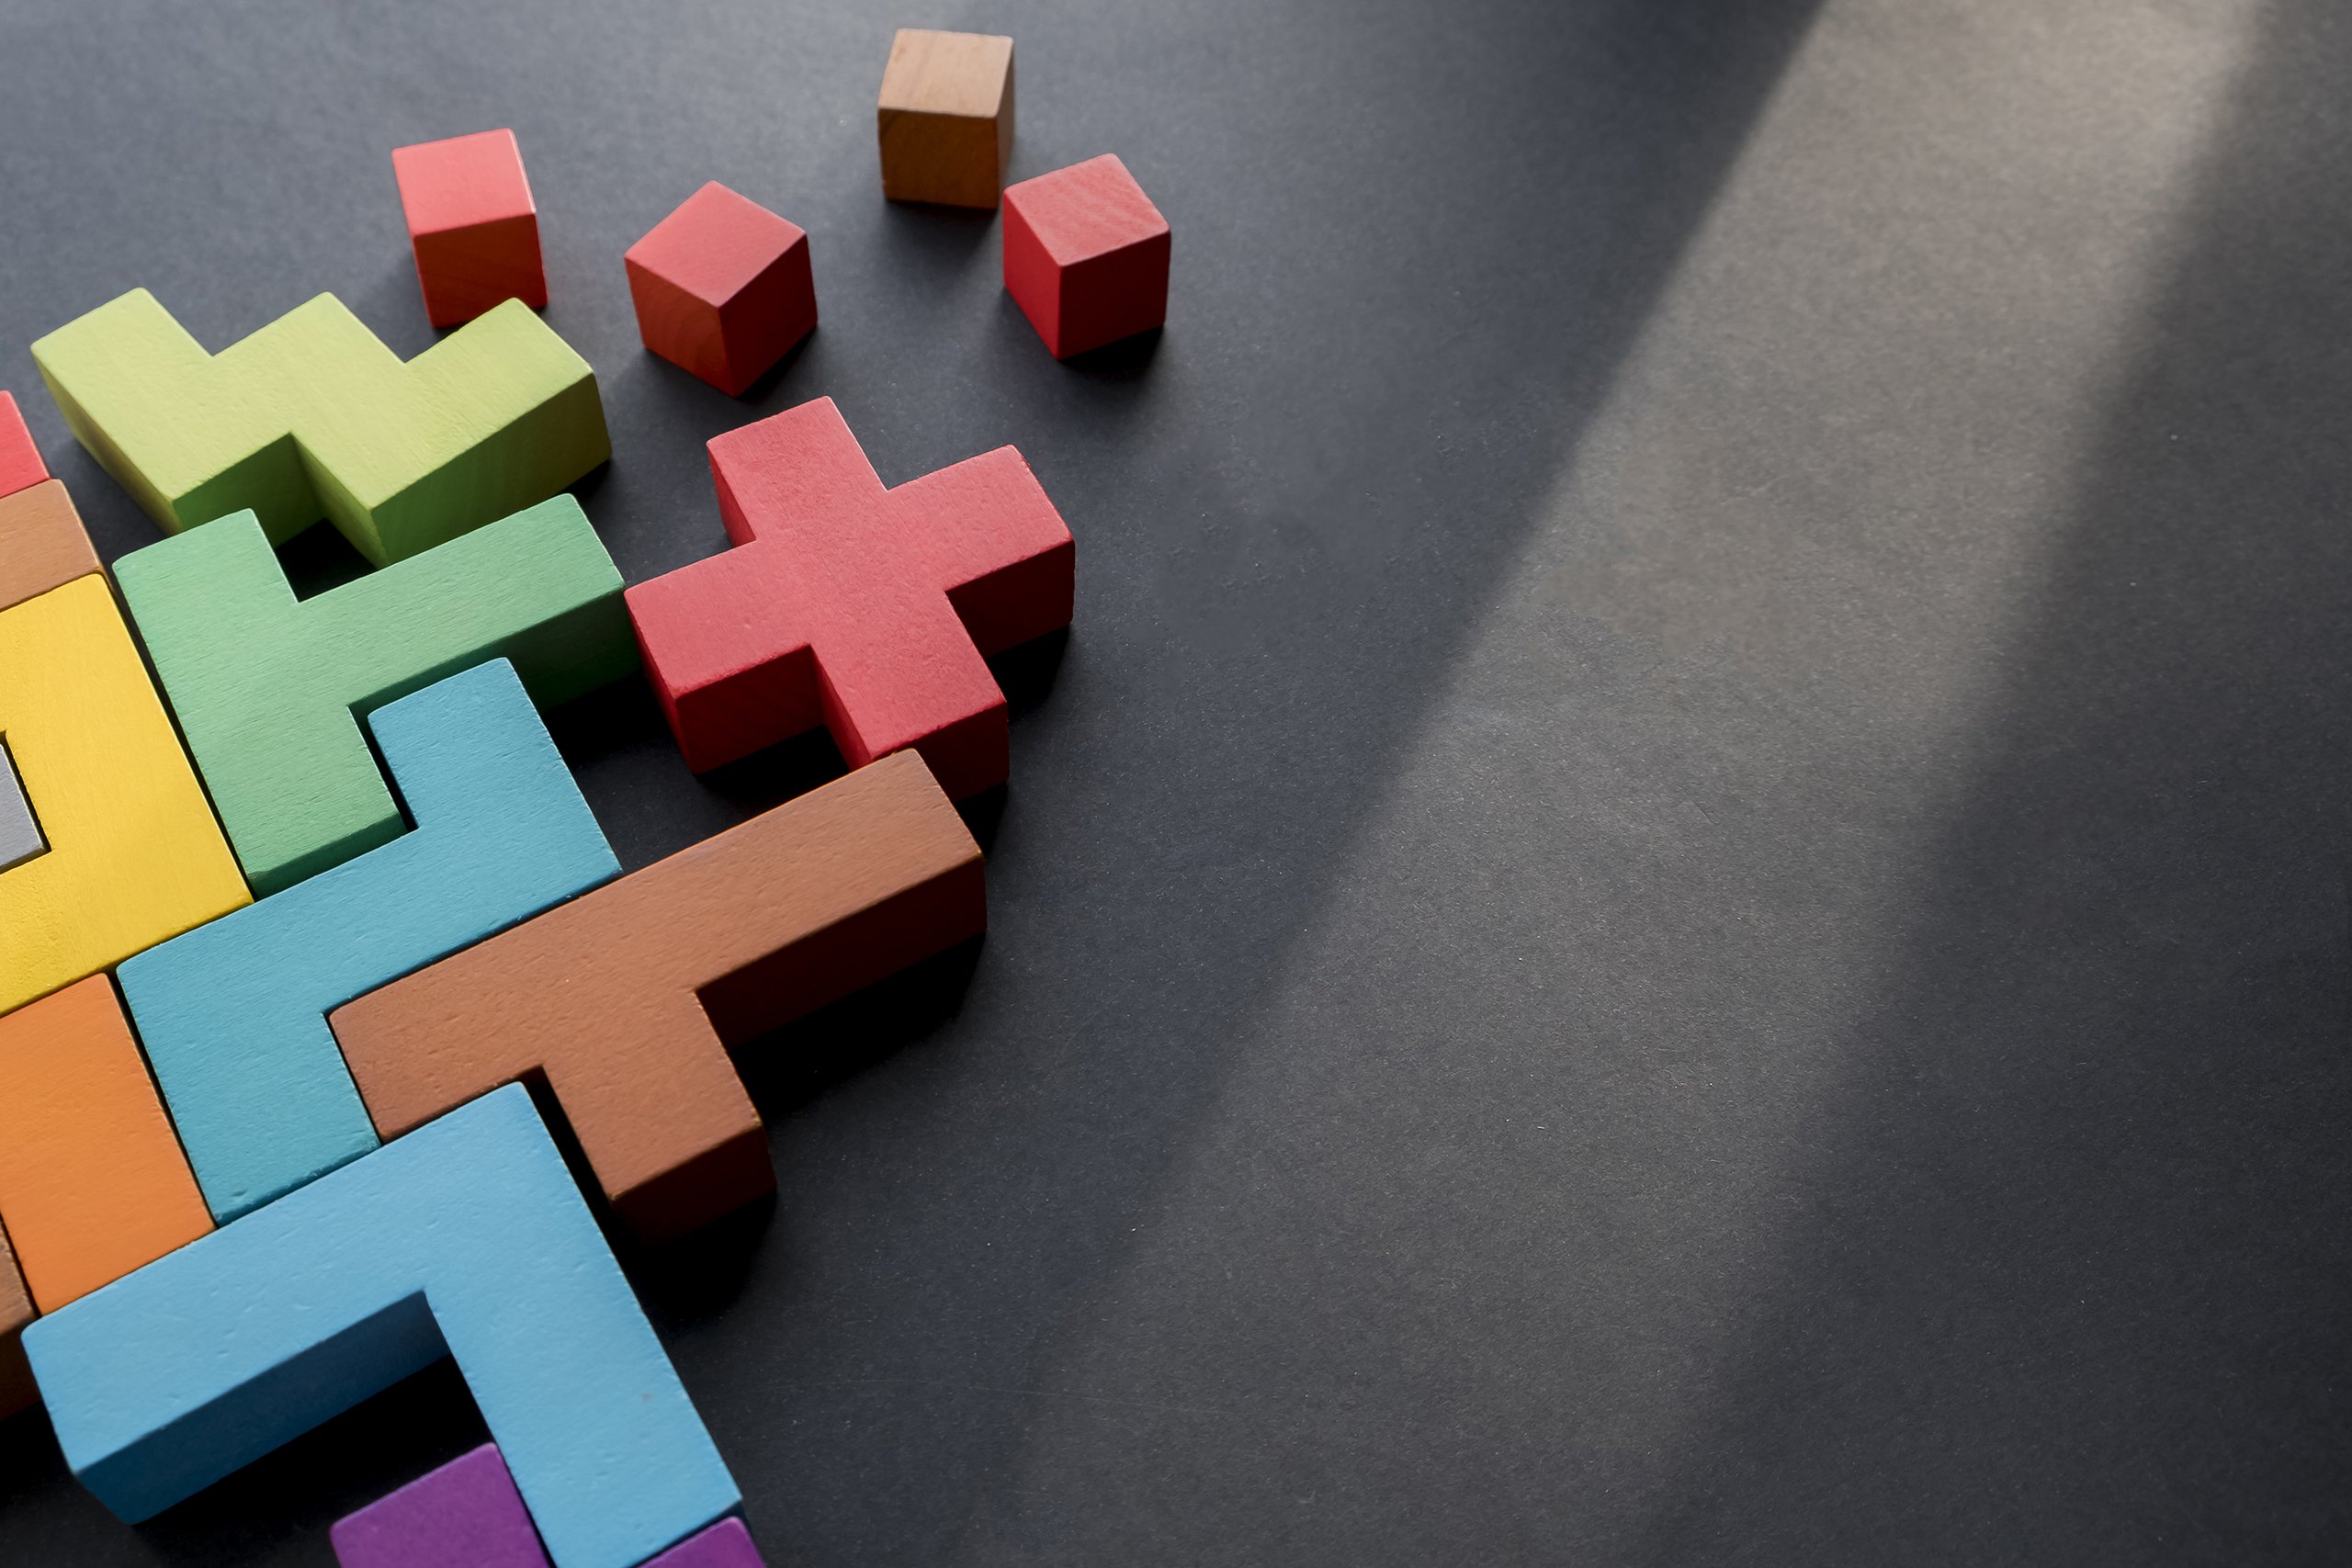 differently coloured and shaped blocks put together tetris-style